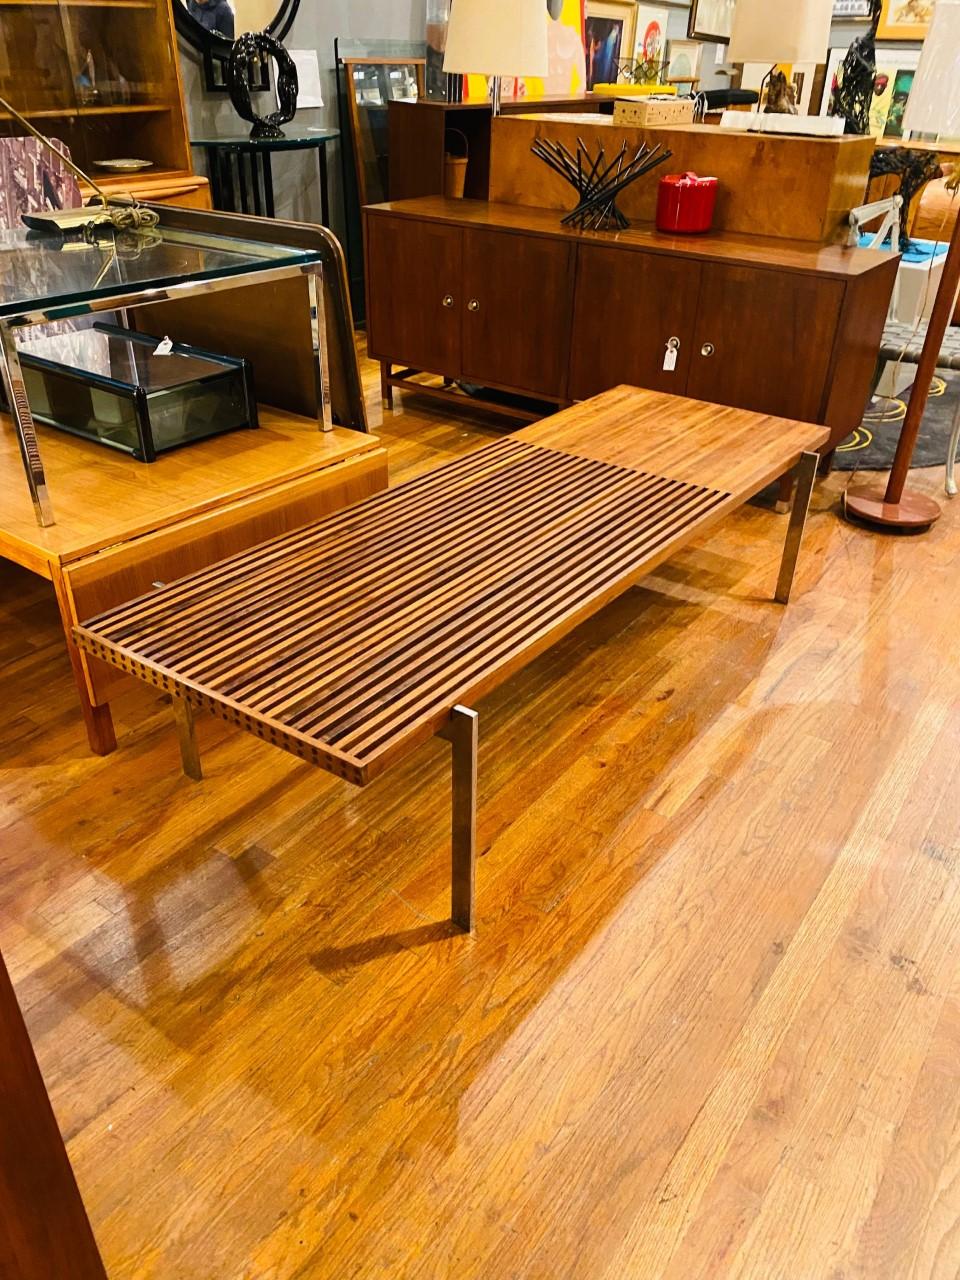 Beautiful Walnut Vintage Mid Century Slat Bench and Coffee table. This beautiful vintage piece is iconic mid-century as it is current.  The minimal lines are superb, drawing your eye to its beautiful form with function.  The top consists of a slat